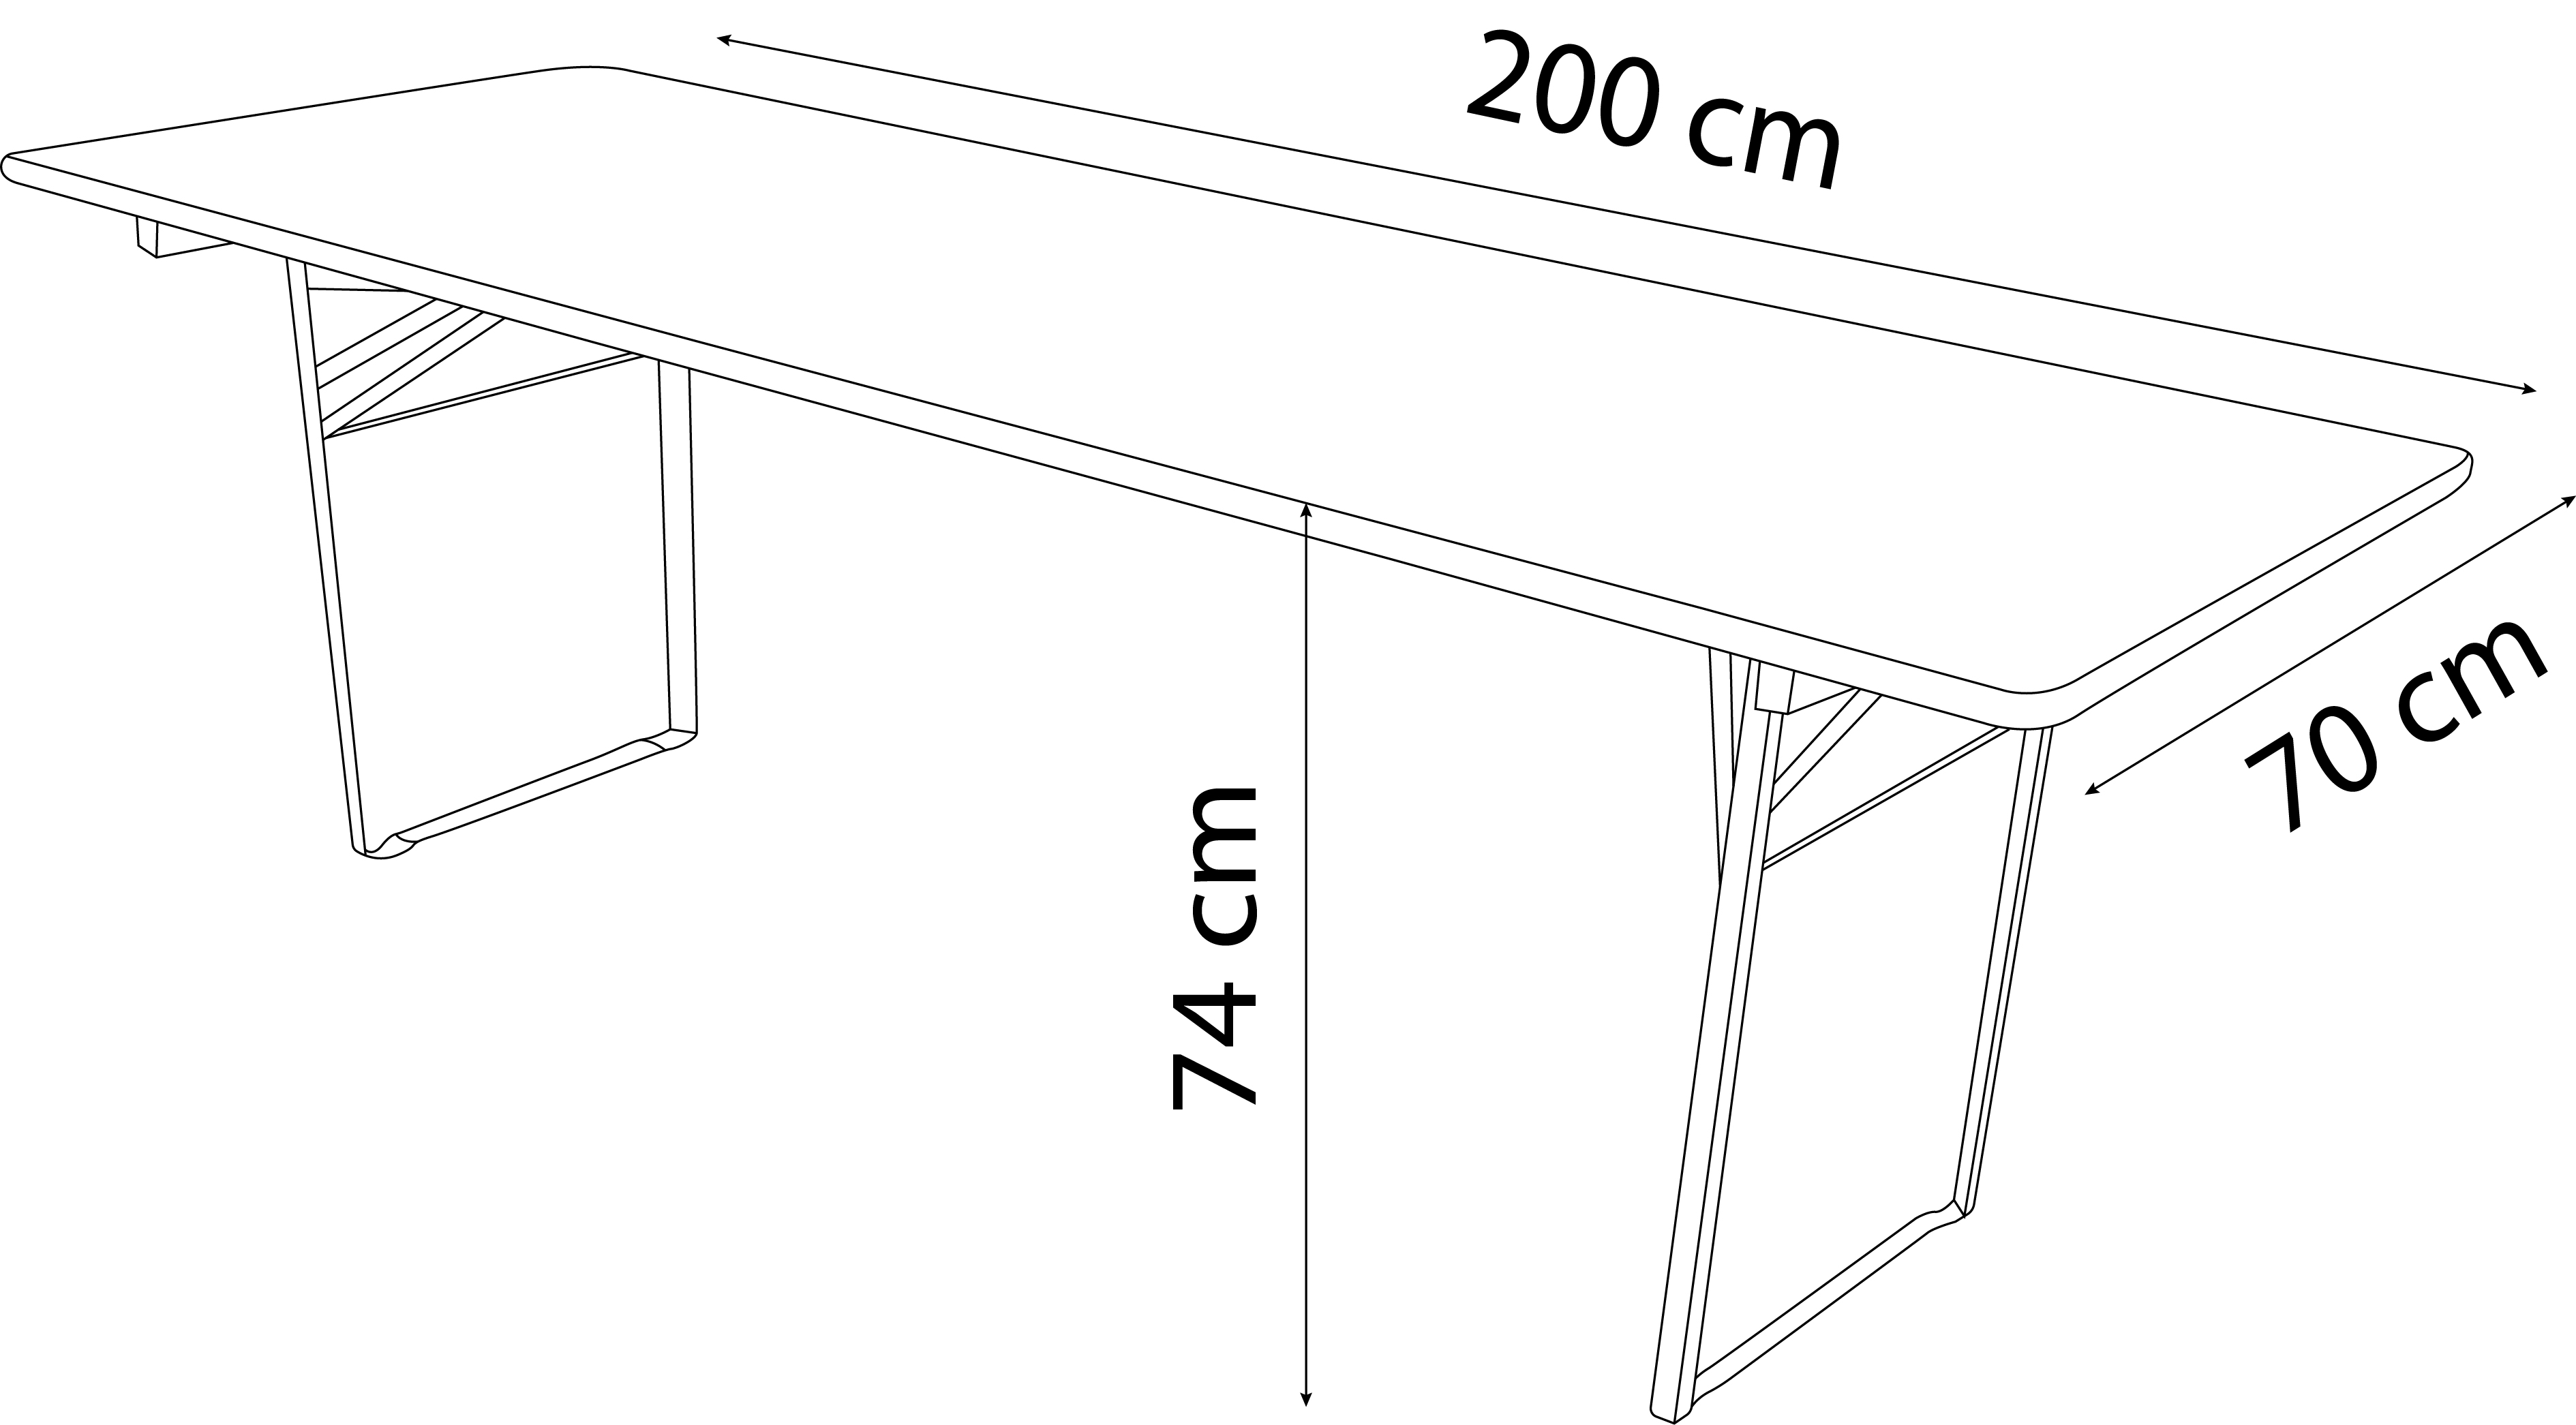 6,5ft Beer set table 200x70cm (benches sold separately) / steel corner legs